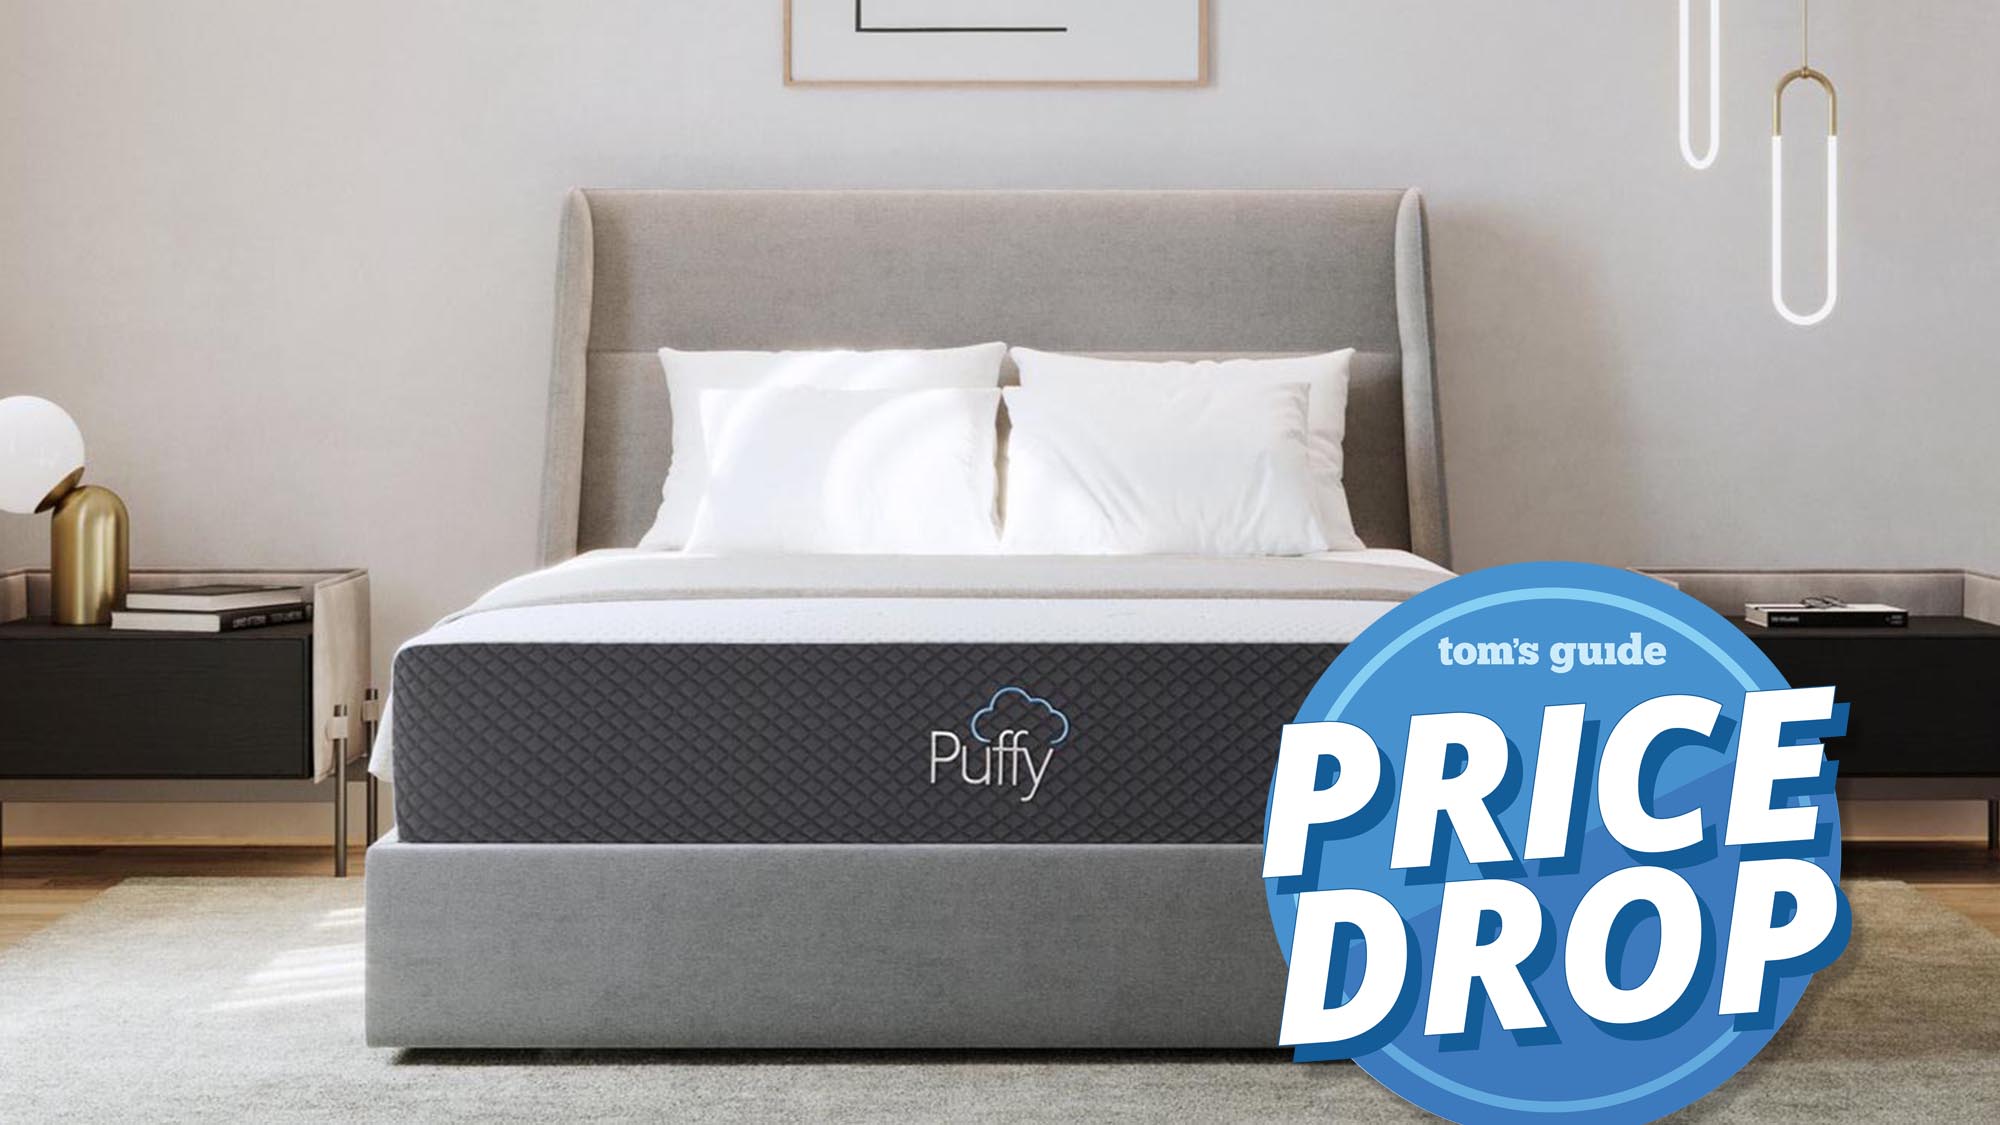 Huge Puffy mattress sale saves you up to $755 this Labor Day | Tom's Guide